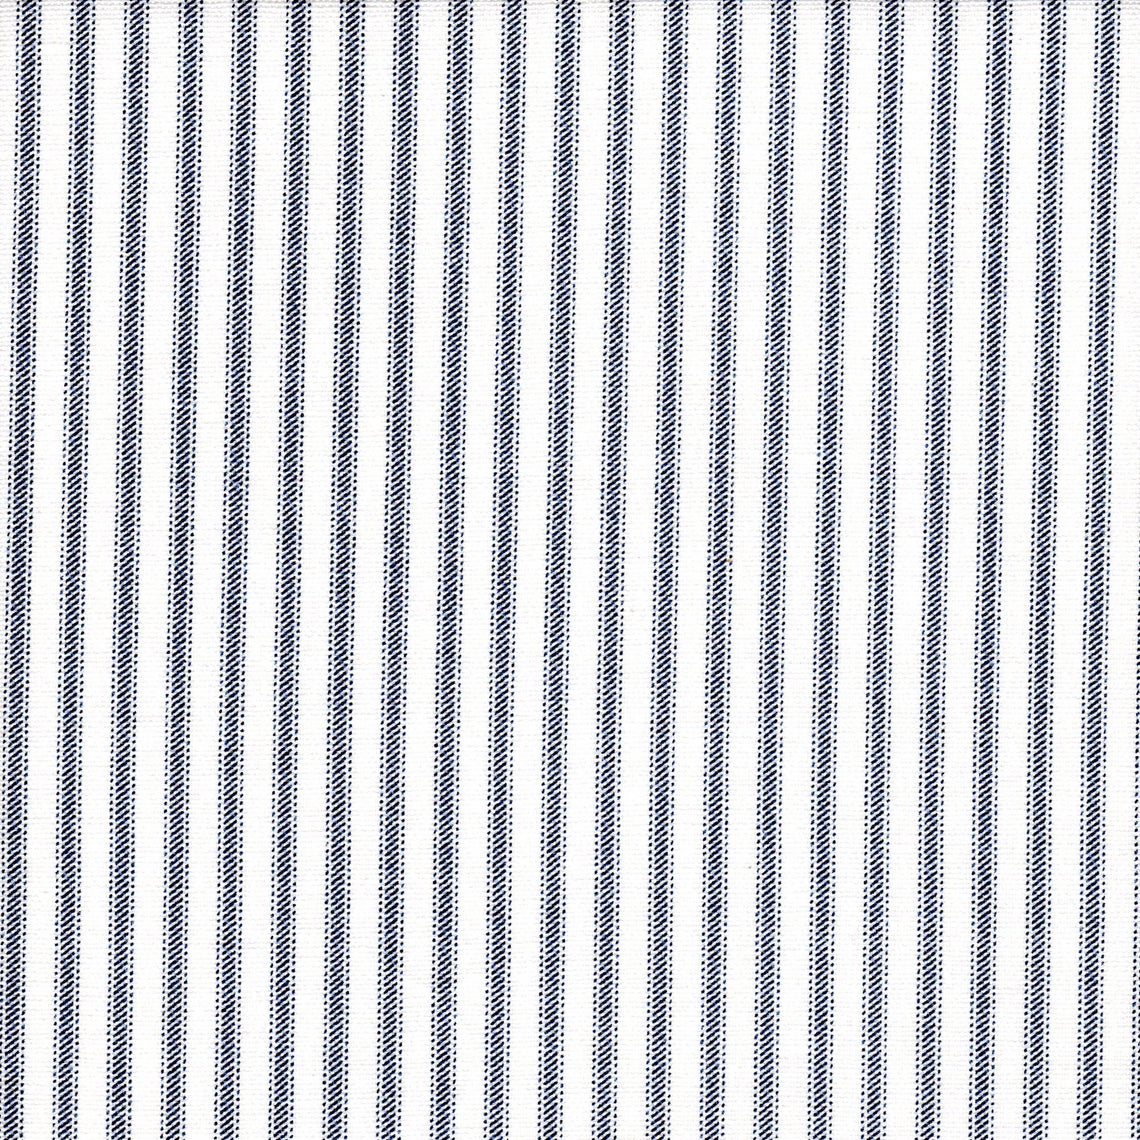 rod pocket curtain panels pair in classic navy blue ticking stripe on white